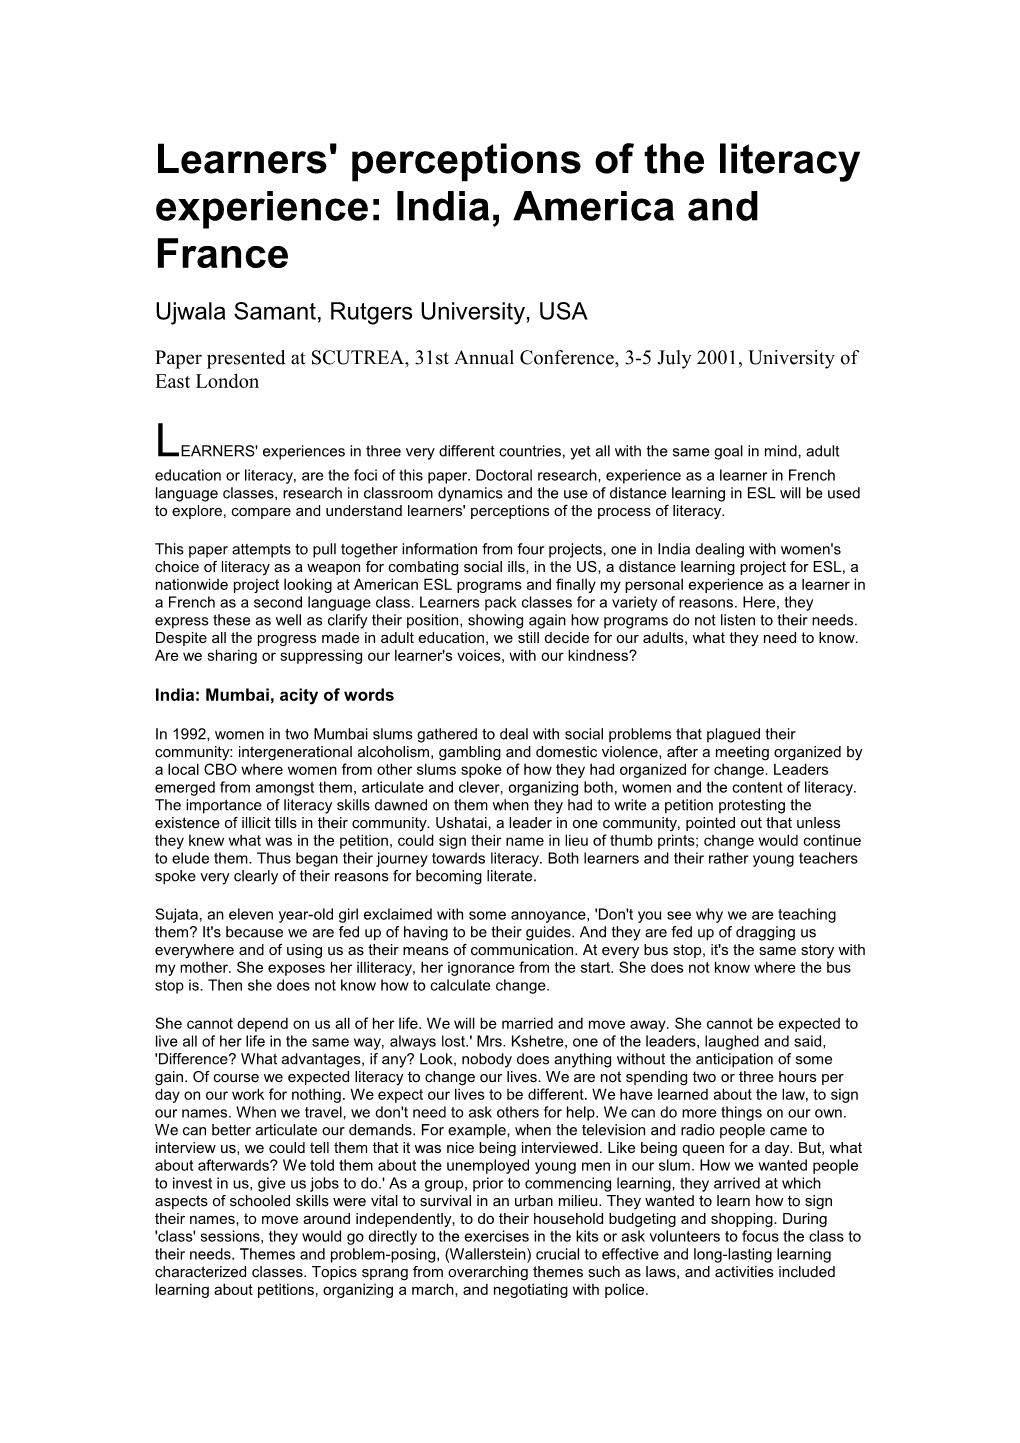 Learners' Perceptions of the Literacy Experience: India, America and France